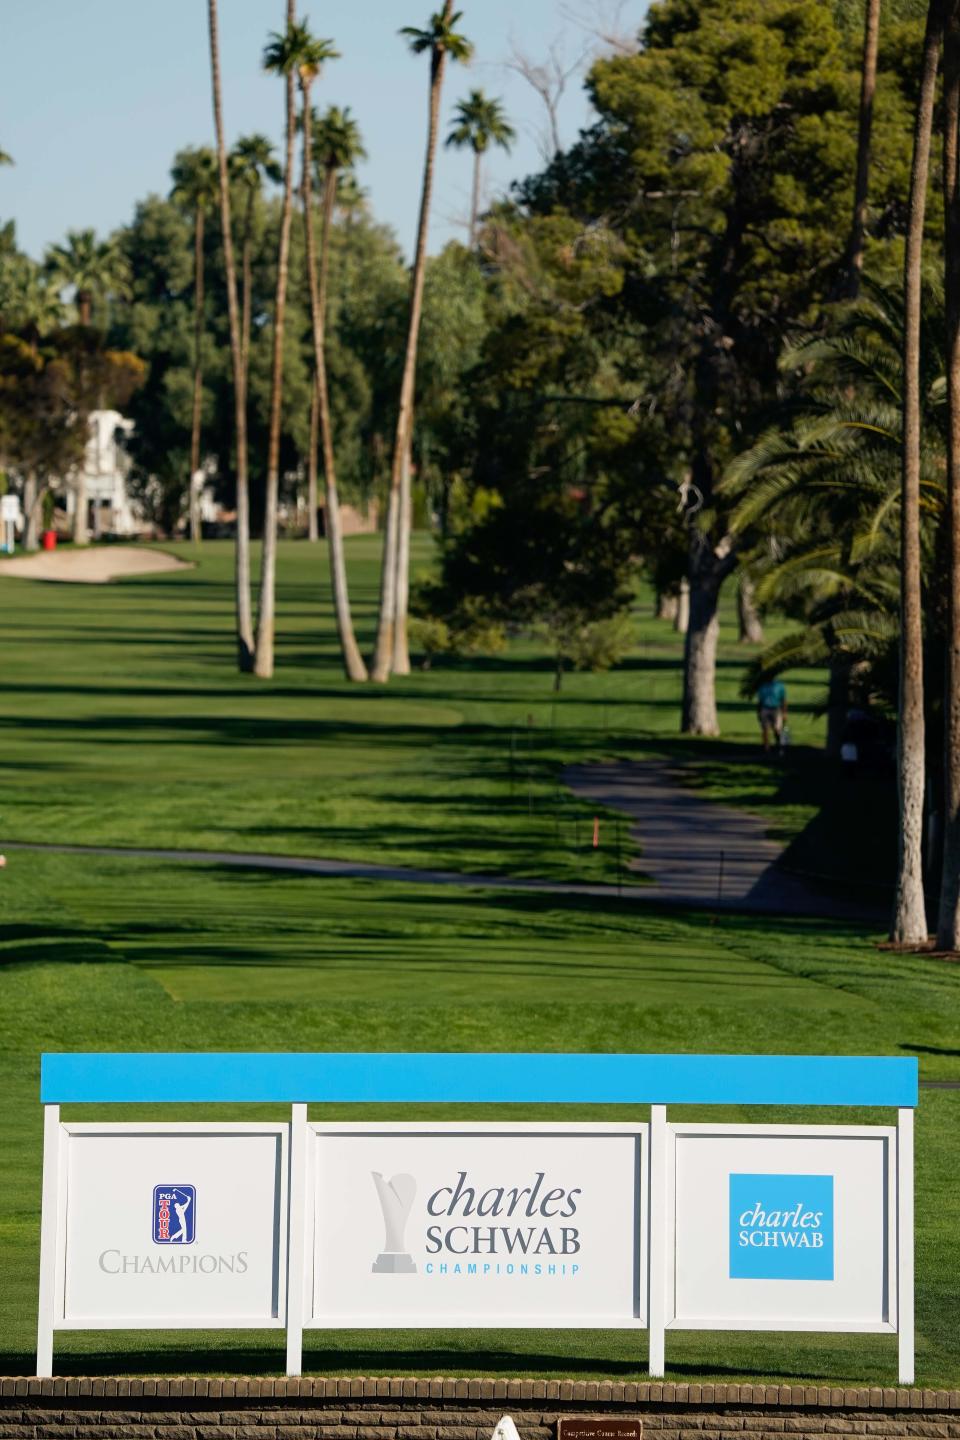 Nov 11, 2021; Phoenix, Arizona, USA; A detailed view of the 1st hole and related course signage during the first round of the Charles Schwab Cup Championship golf tournament at Phoenix Country Club. Mandatory Credit: Allan Henry-USA TODAY Sports